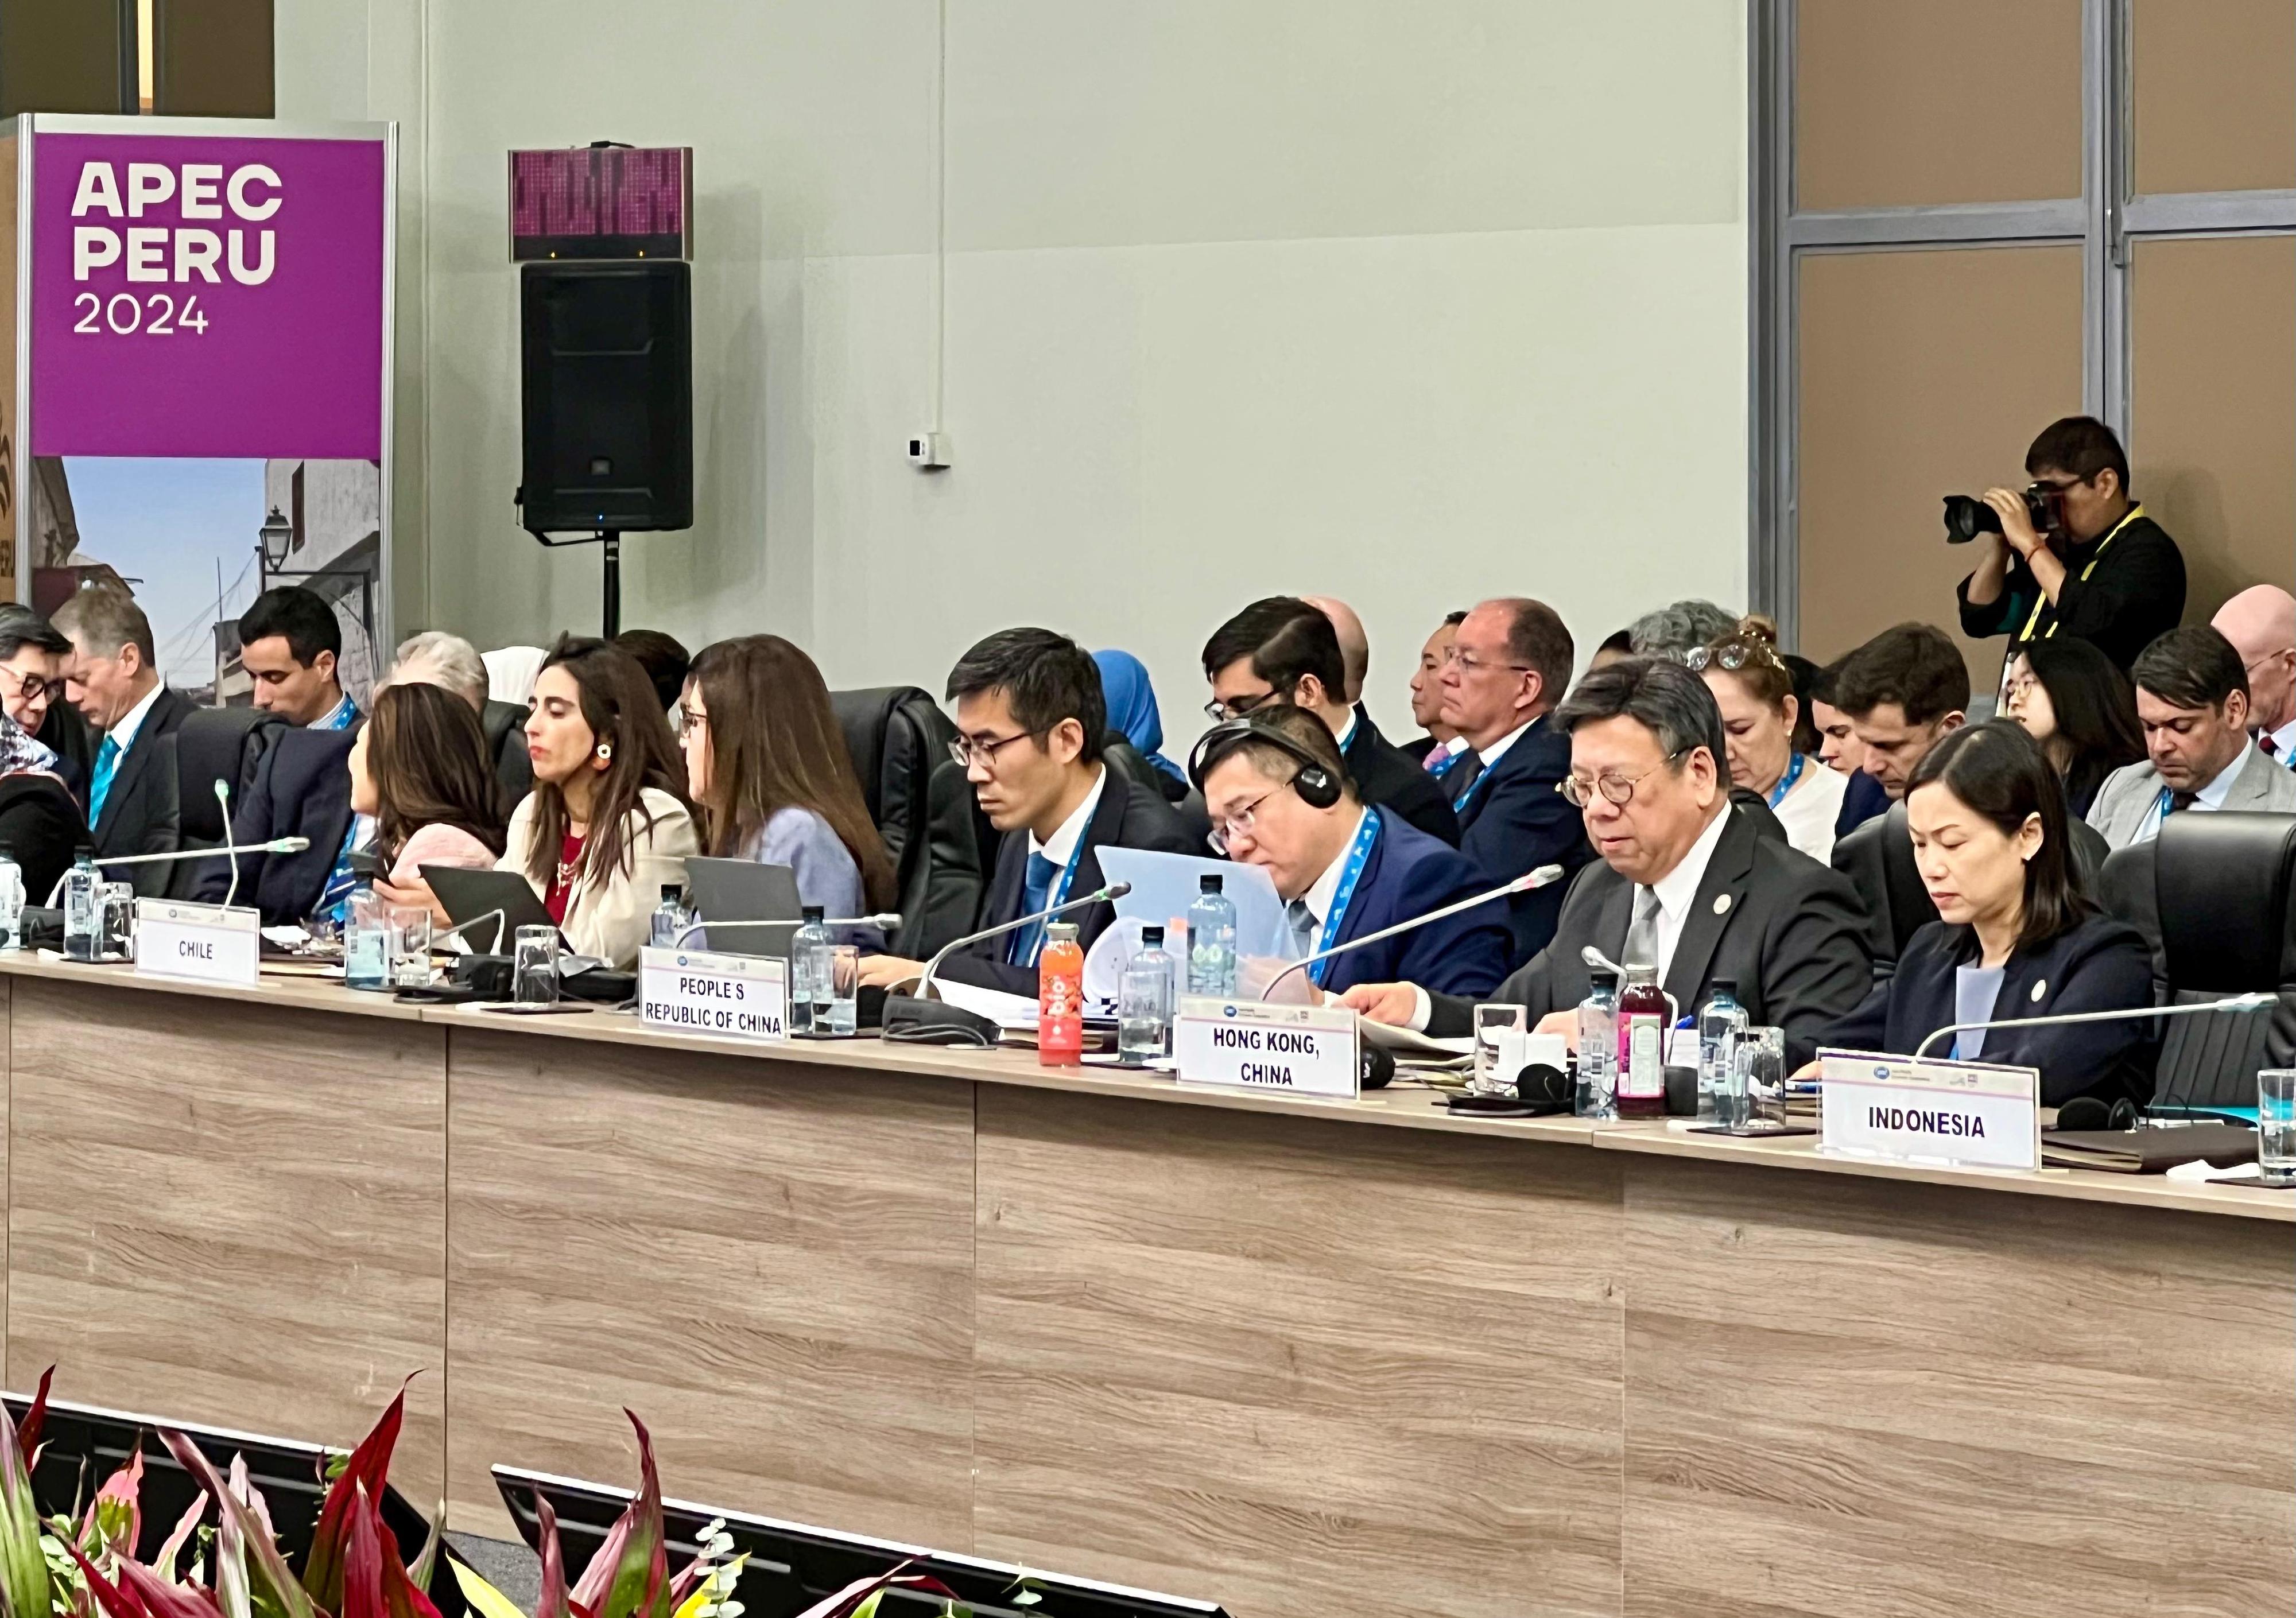 The Secretary for Commerce and Economic Development, Mr Algernon Yau (front row, second right), speaks at a discussion session entitled "Trade Liberalisation: World Trade Organization" at the Asia-Pacific Economic Cooperation Ministers Responsible for Trade Meeting in Arequipa, Peru, on May 17 (Arequipa time). Looking on is the Director-General of Trade and Industry, Ms Maggie Wong (front row, first right).